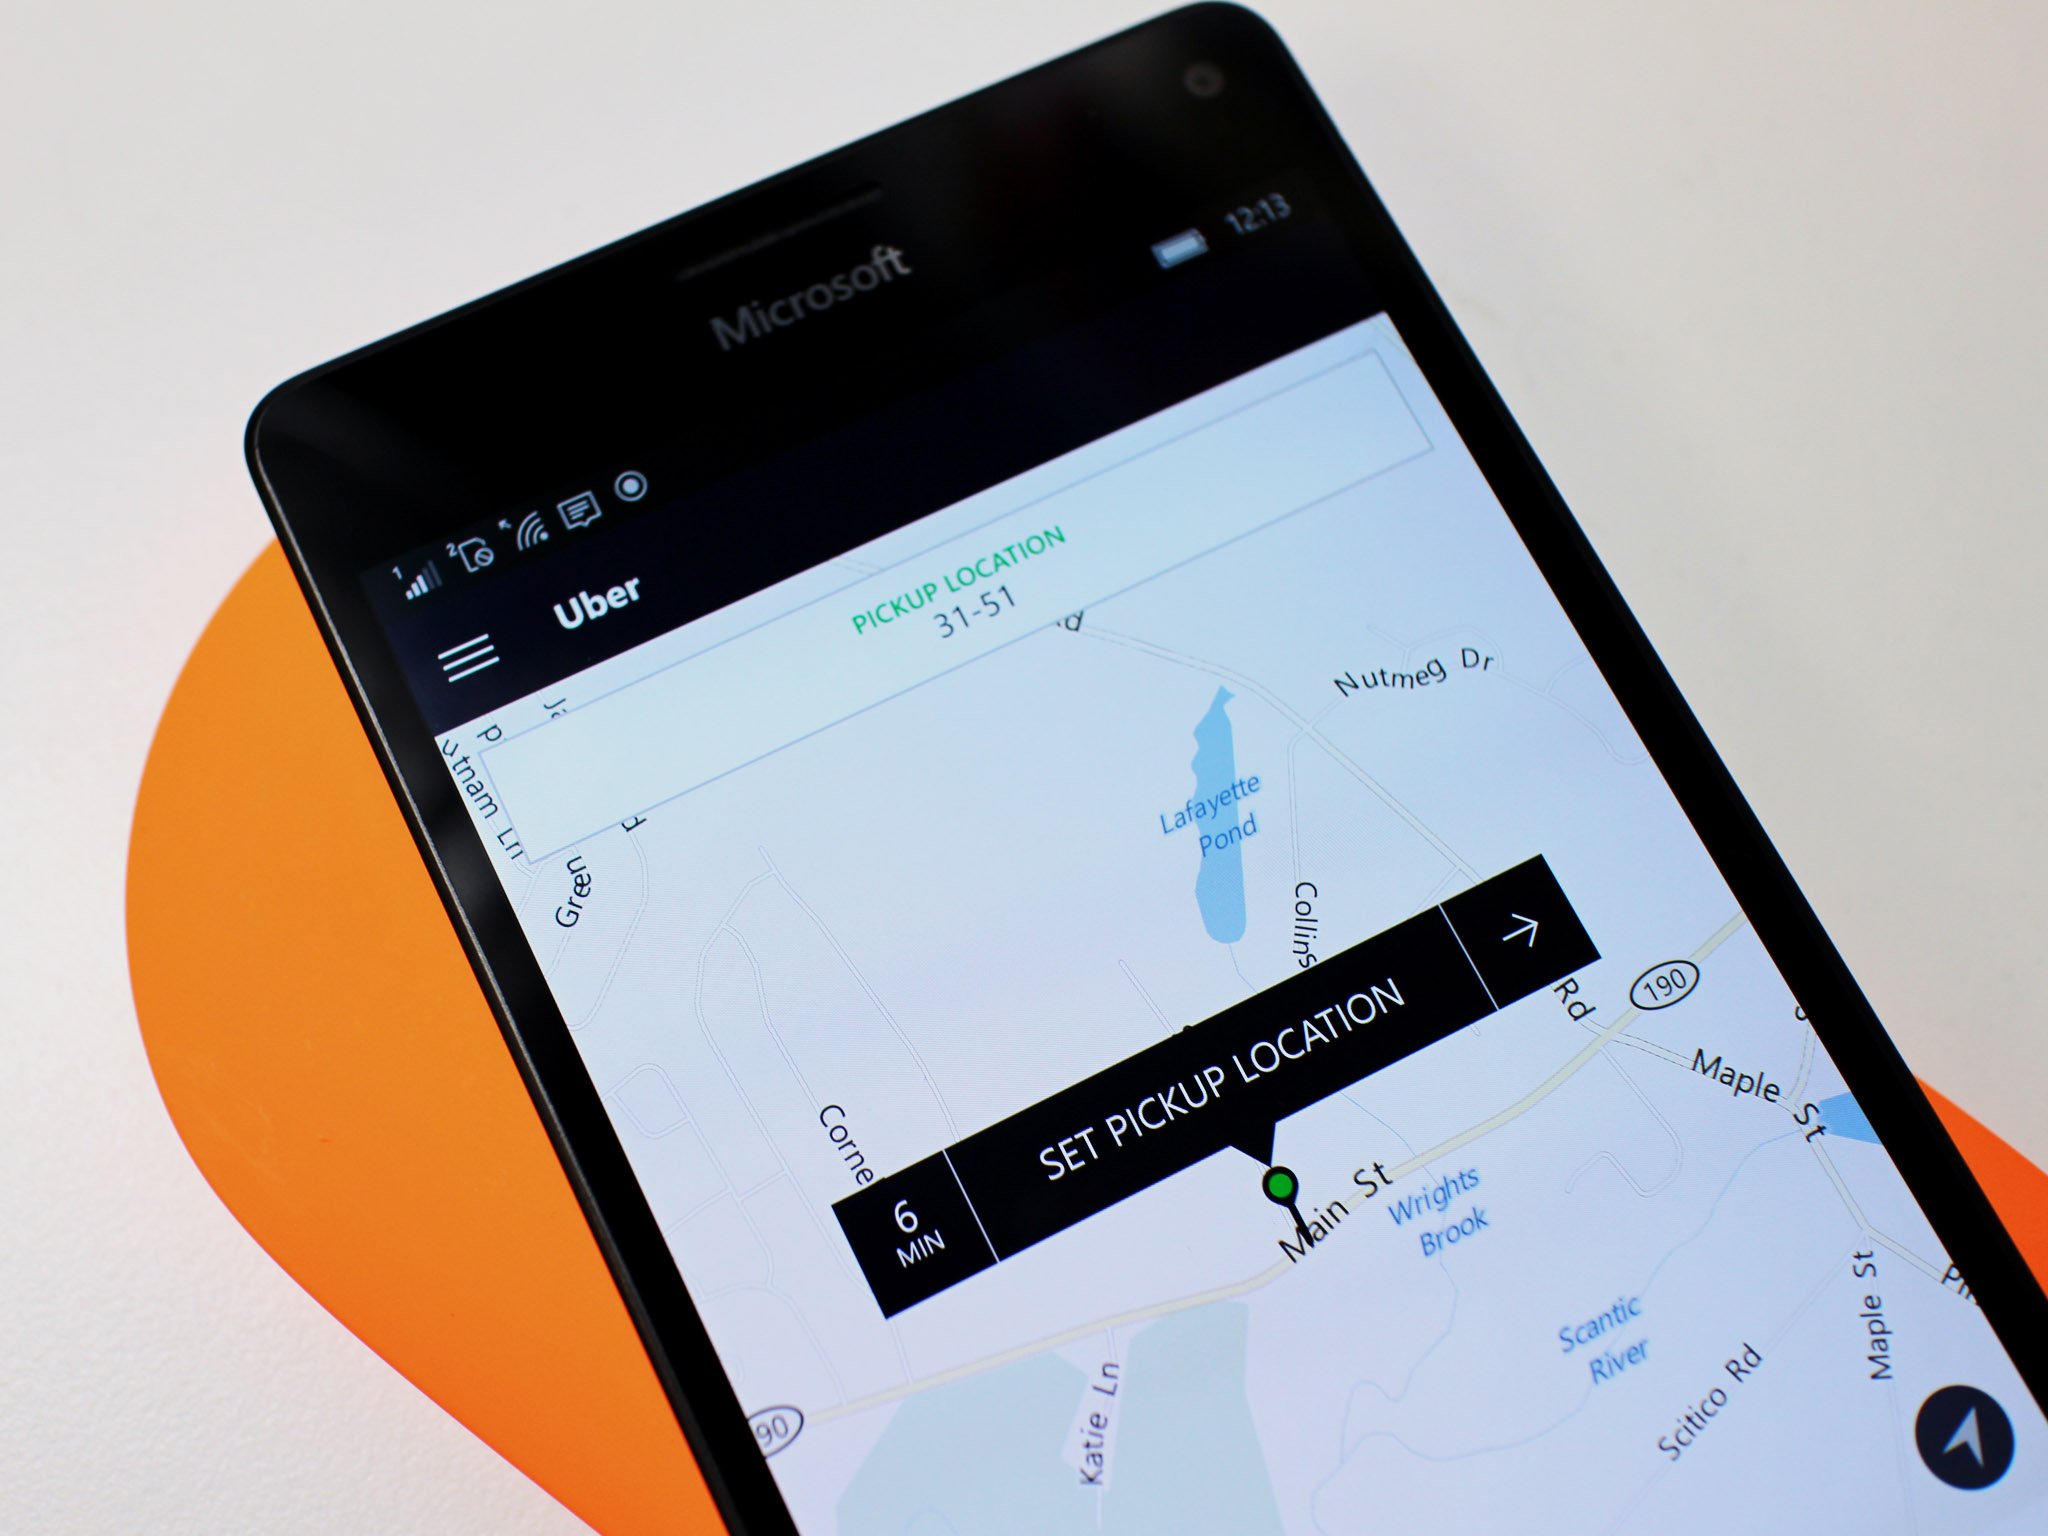 Uber app gets updated for Windows 10 Mobile with new layout | Windows Central1200 x 900